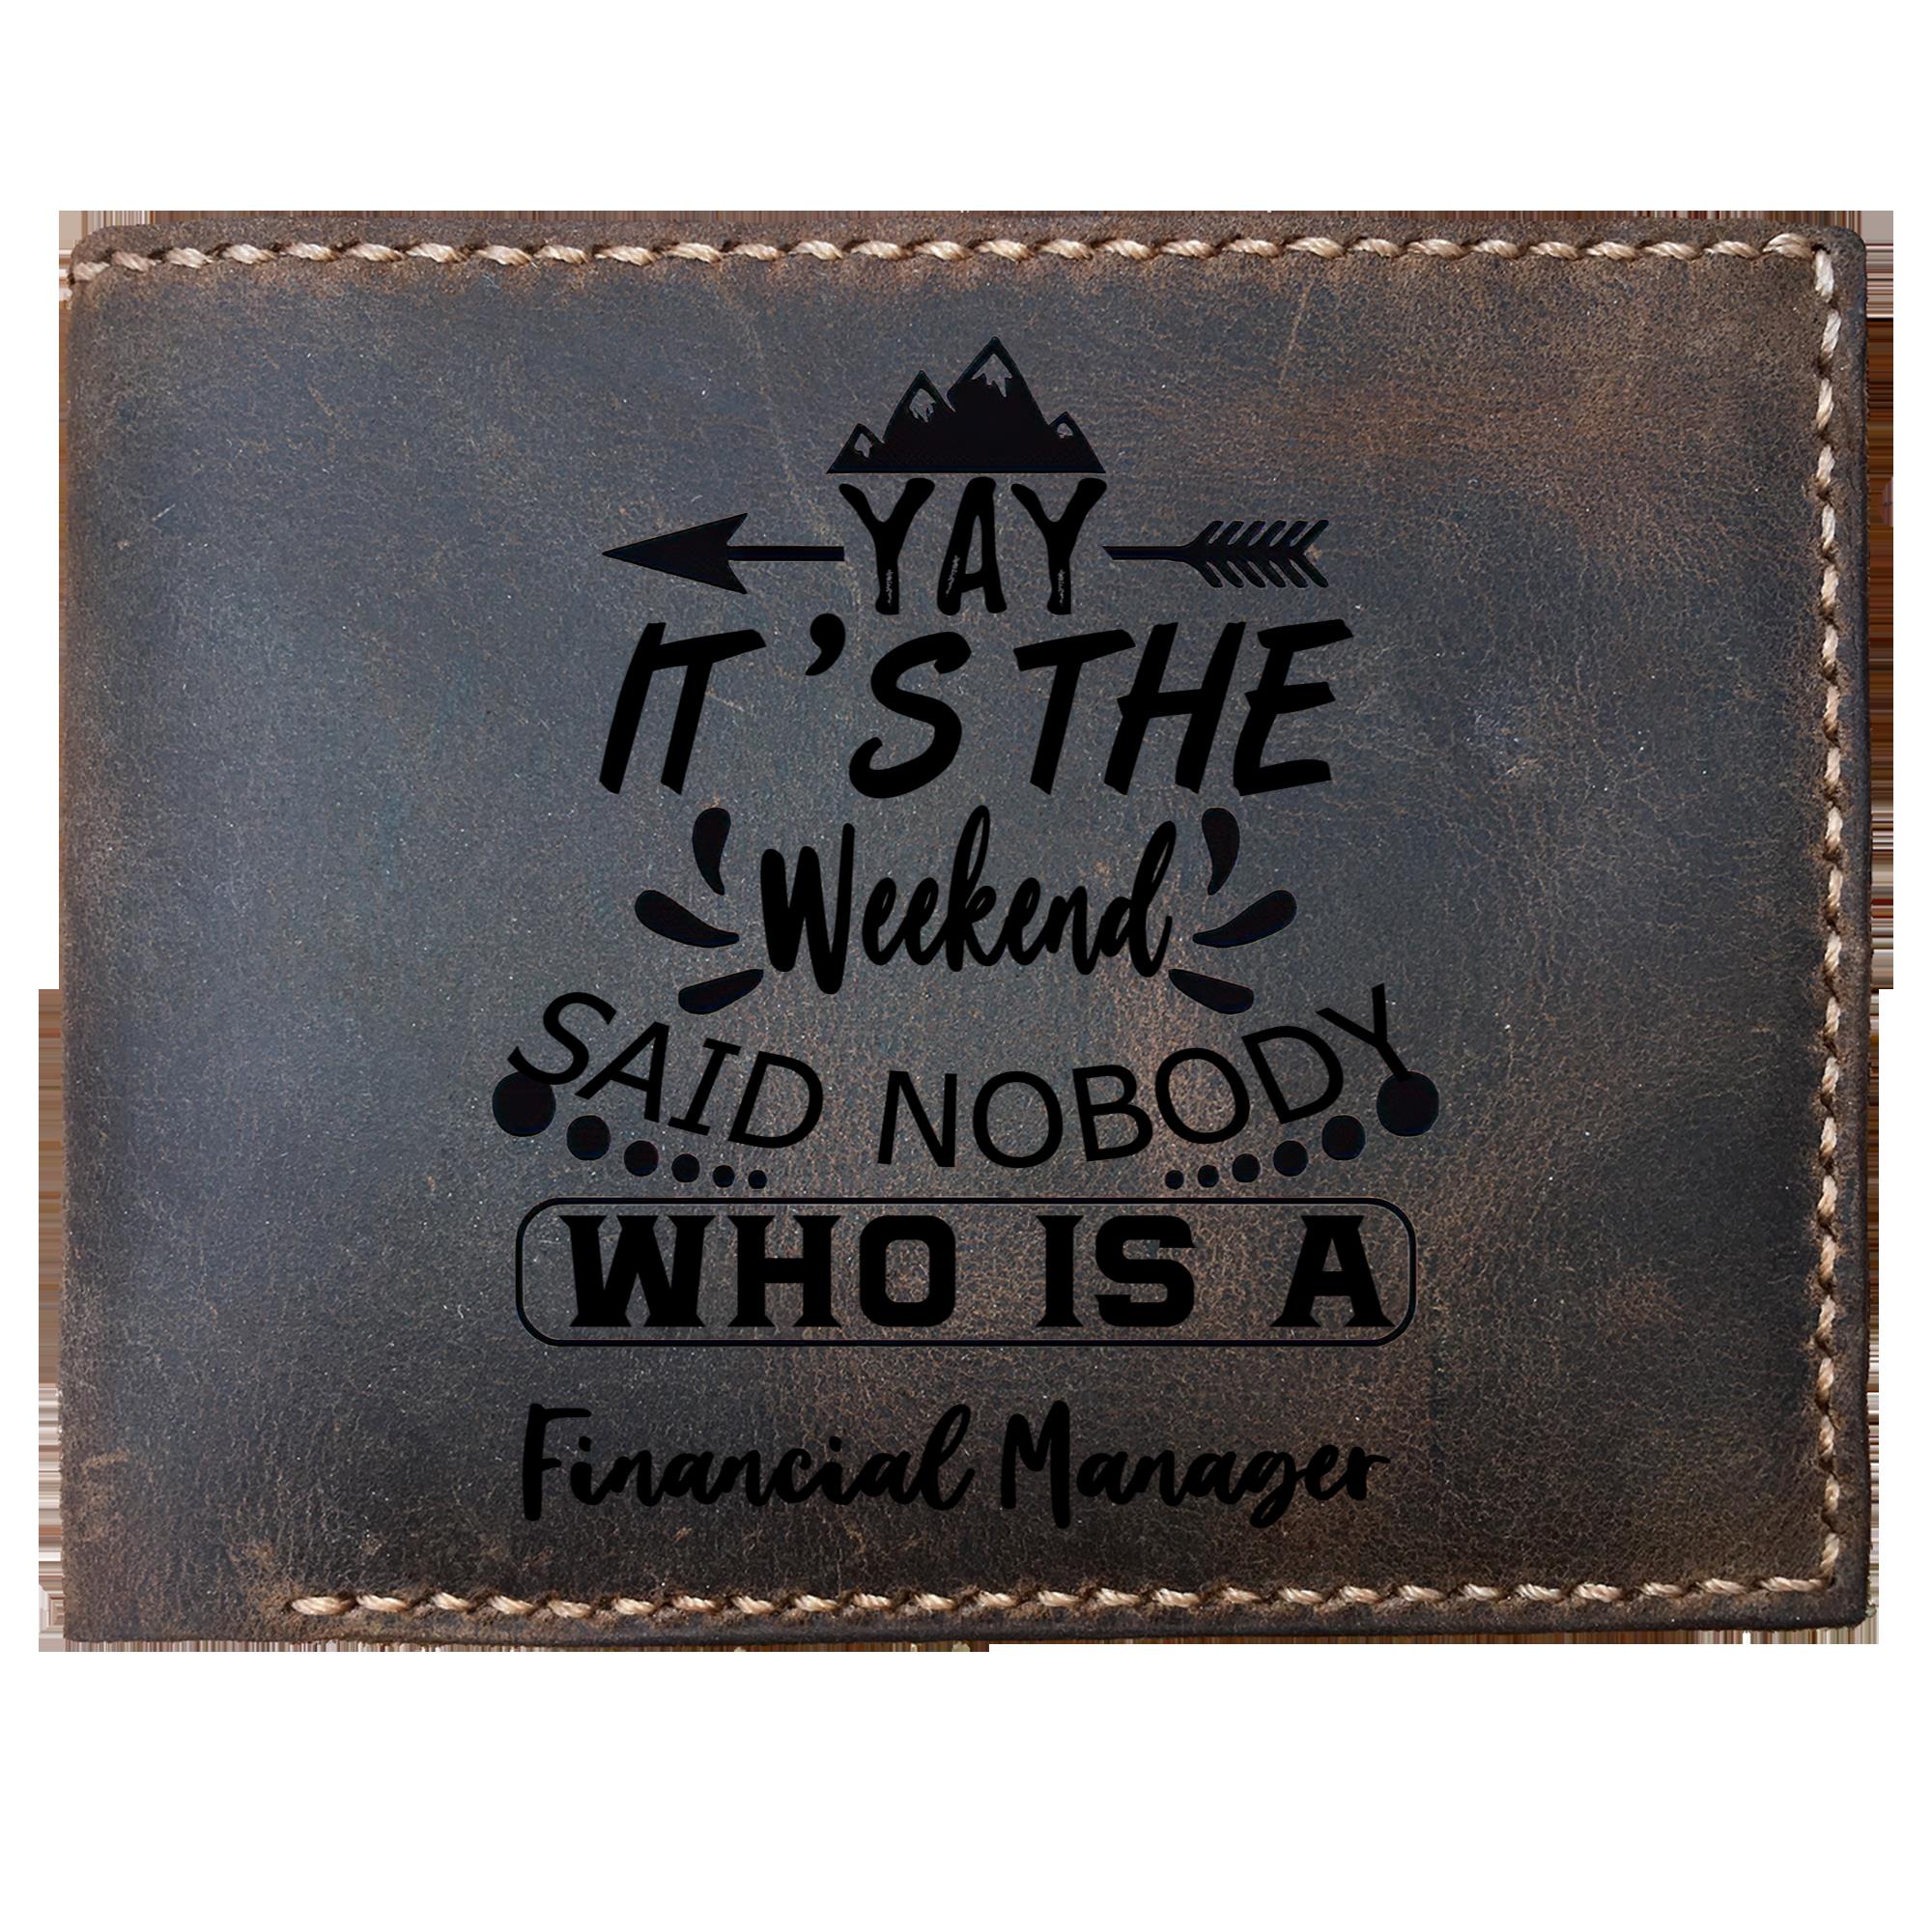 Skitongifts Funny Custom Laser Engraved Bifold Leather Wallet For Men, It's The Weekend Said Nobody Who Is A Financial Manager, Father's Day Gifts